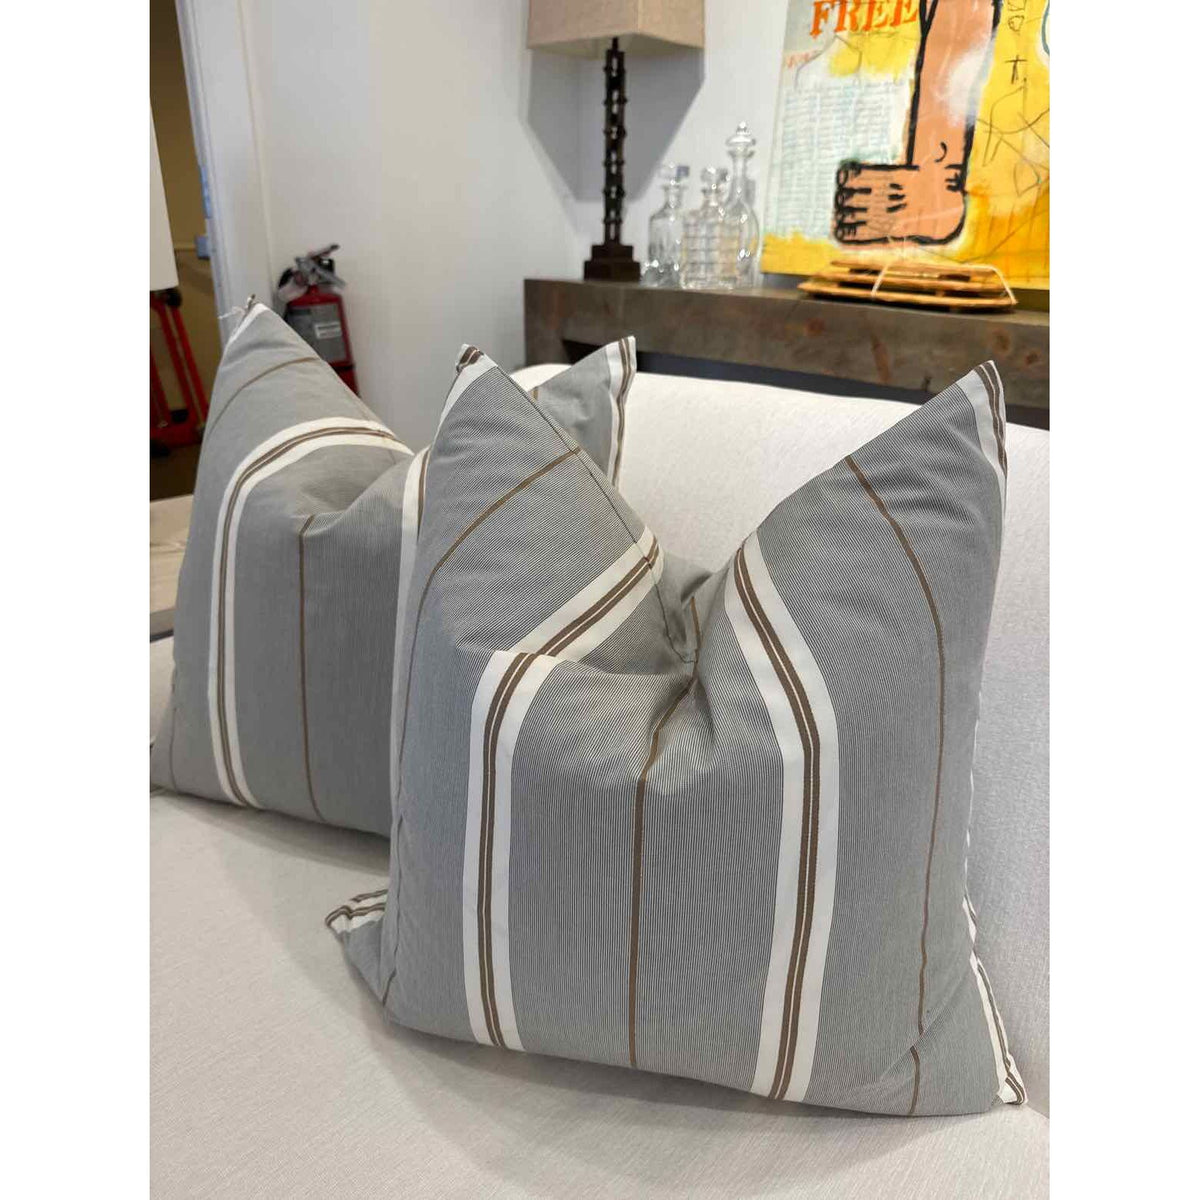 Pair of Striped Grey & Brown Over White Pillows 20"x20"